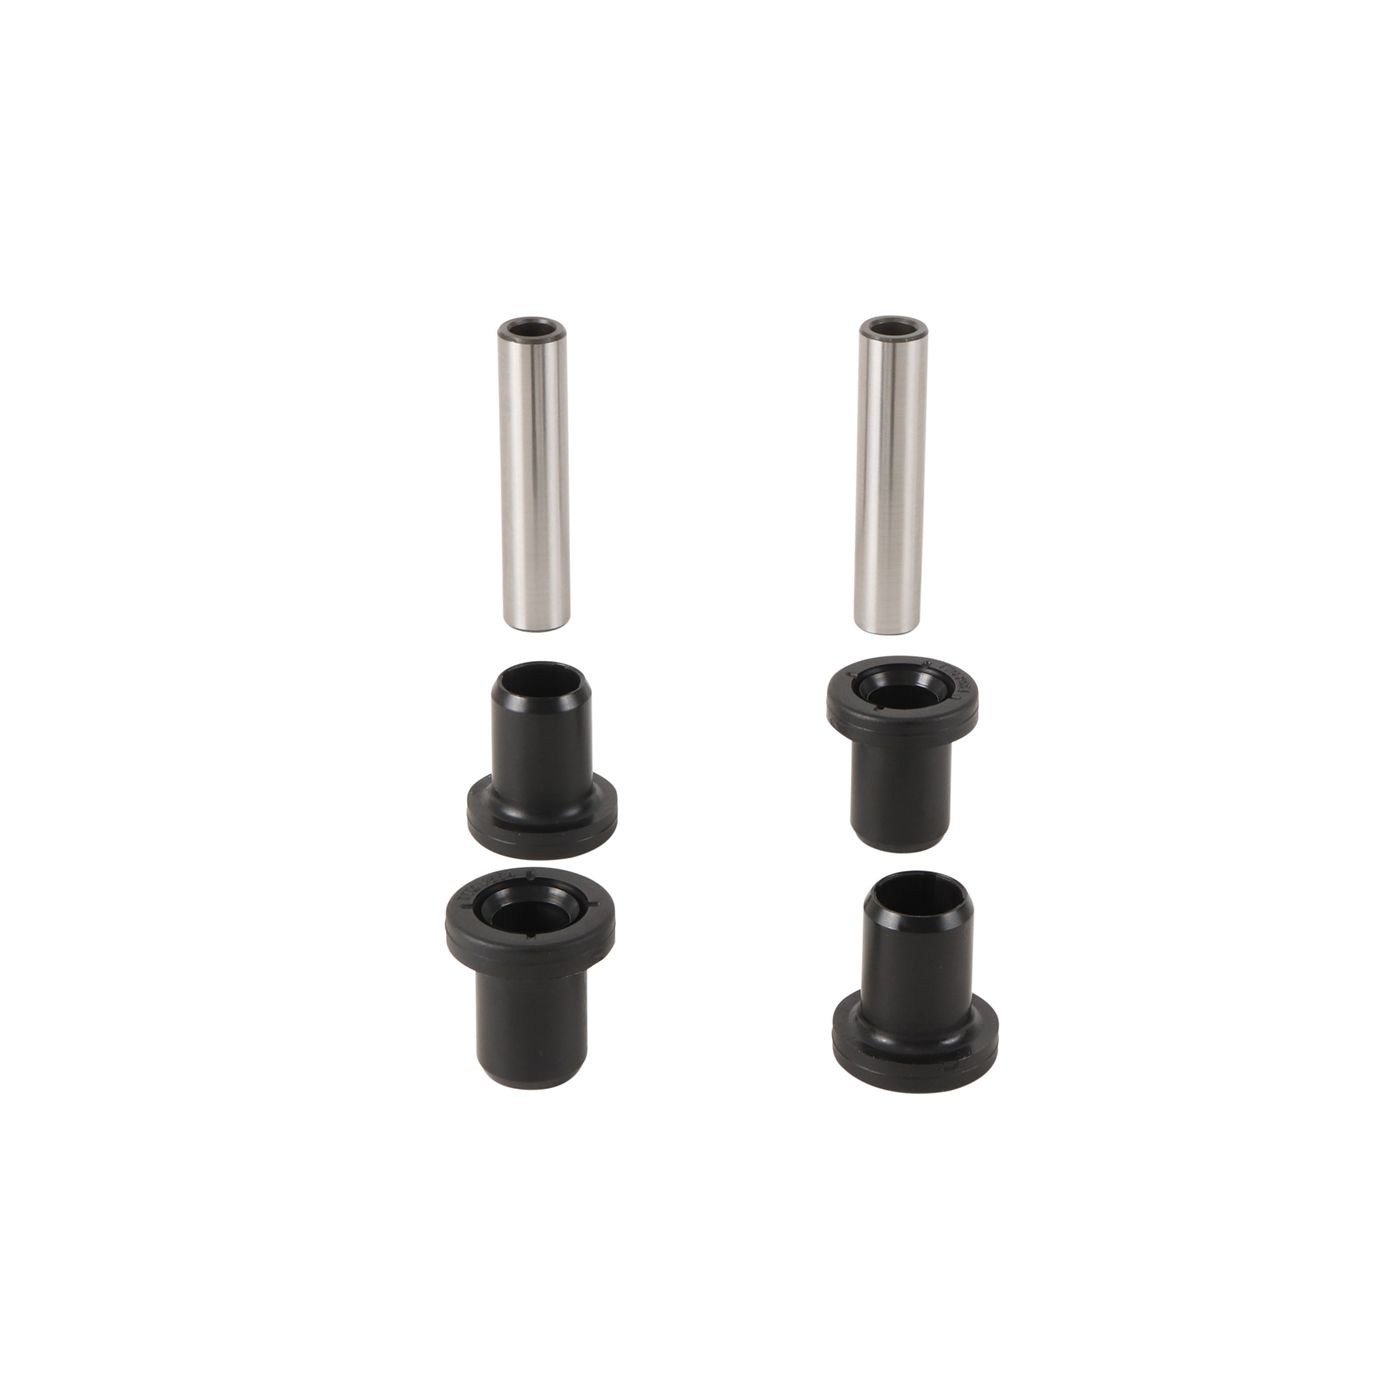 Wrp Rear Ind. Suspension Kits - WRP501214 image